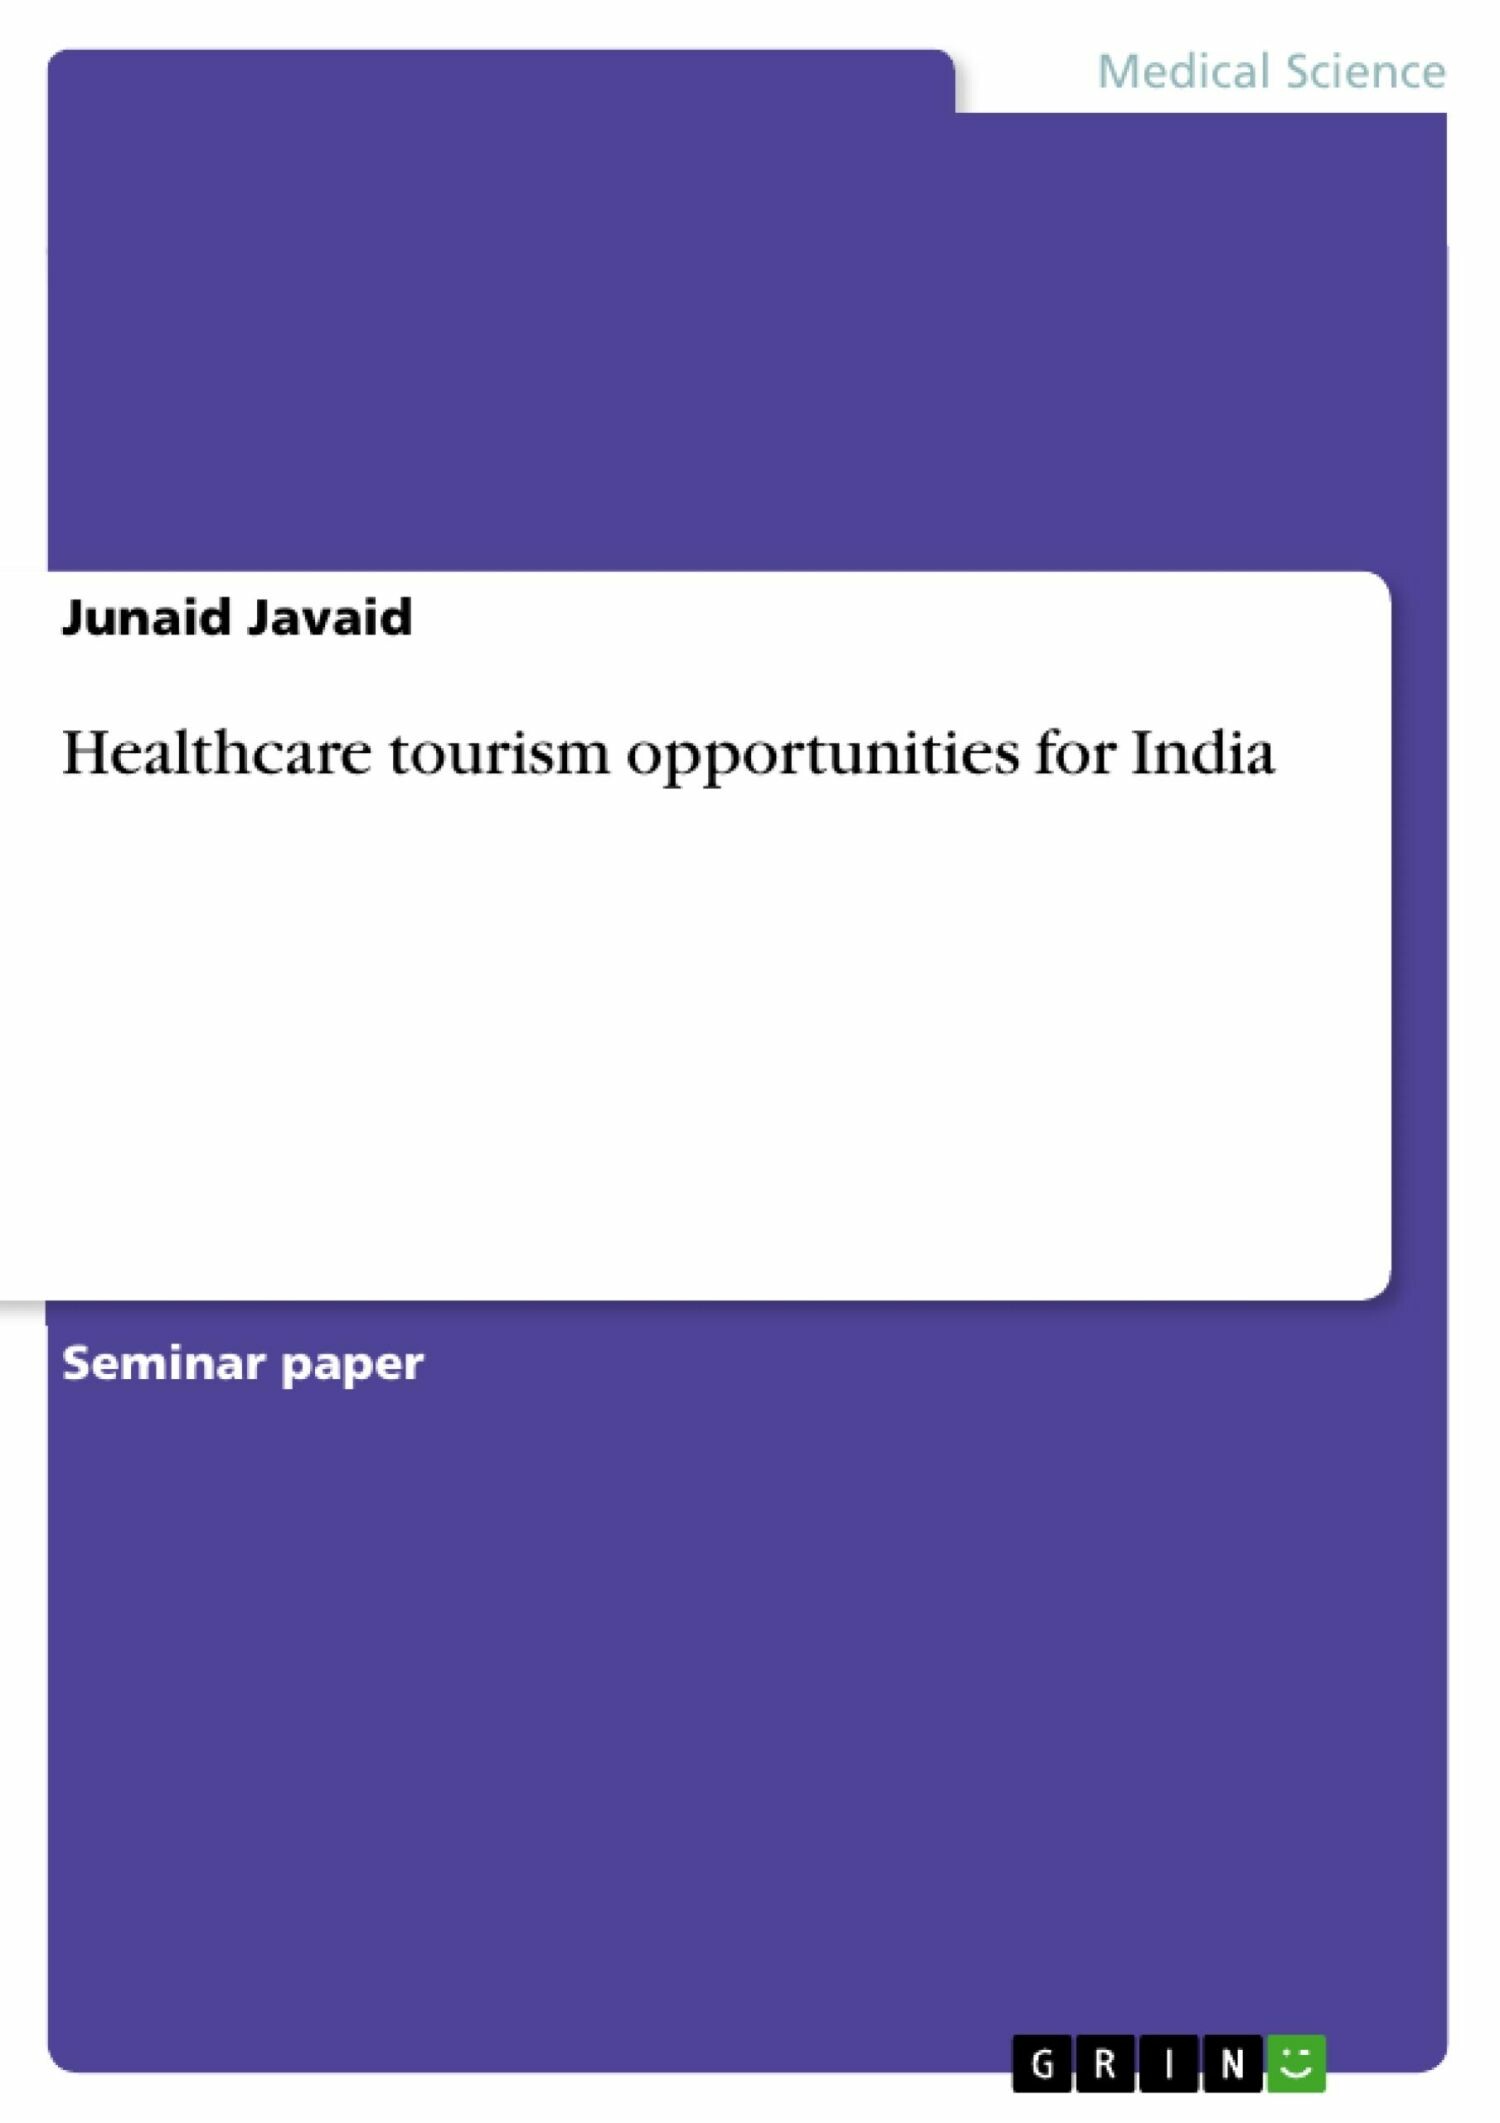 Healthcare tourism opportunities for India